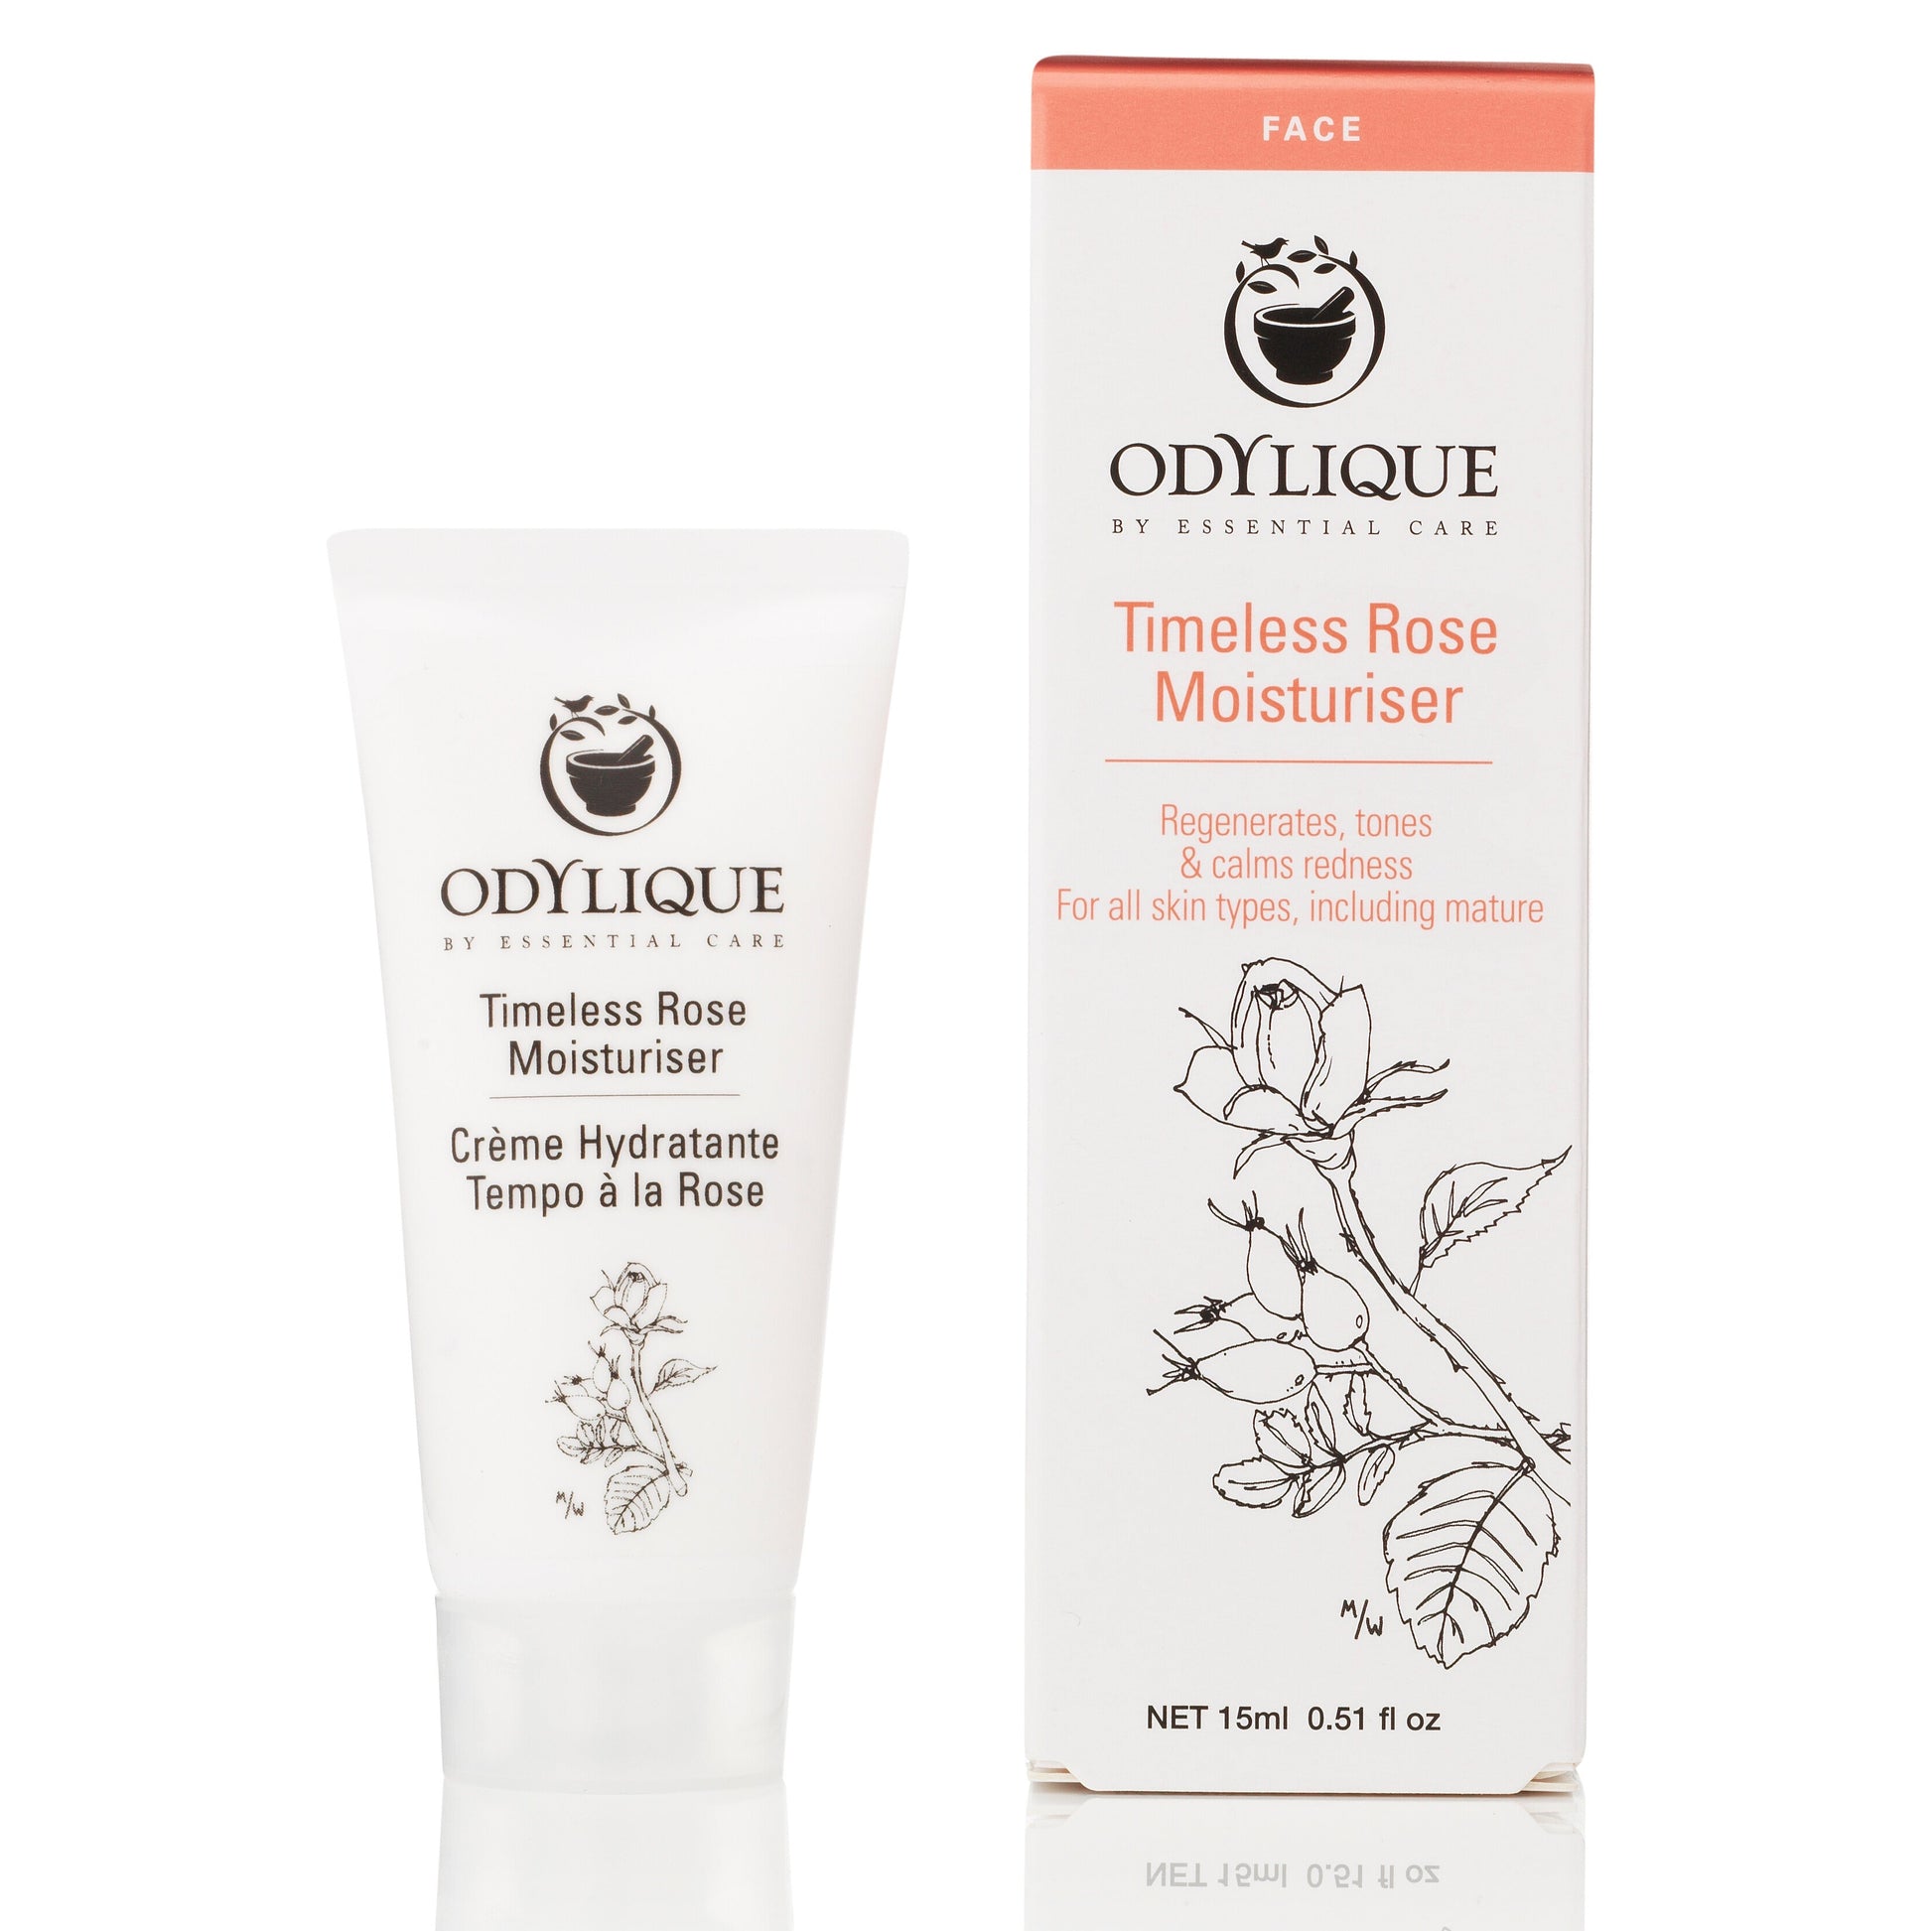 Odylique timeless rose moisturiser. Certified organic skincare. The 15ml white plastic tube is shown next to the paper box it comes in. It is illustrated with a leaf in black and pink text.